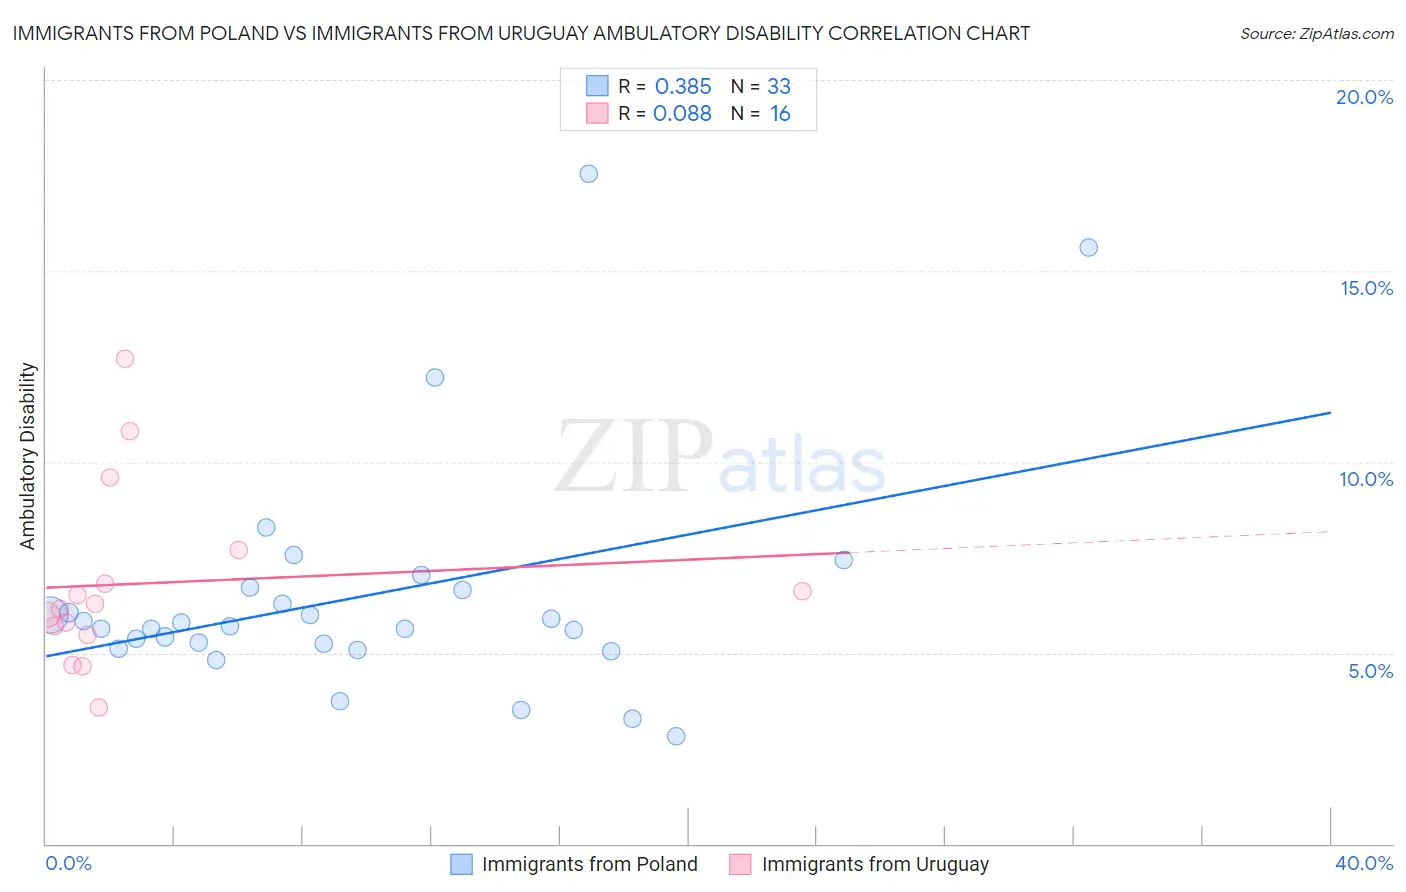 Immigrants from Poland vs Immigrants from Uruguay Ambulatory Disability